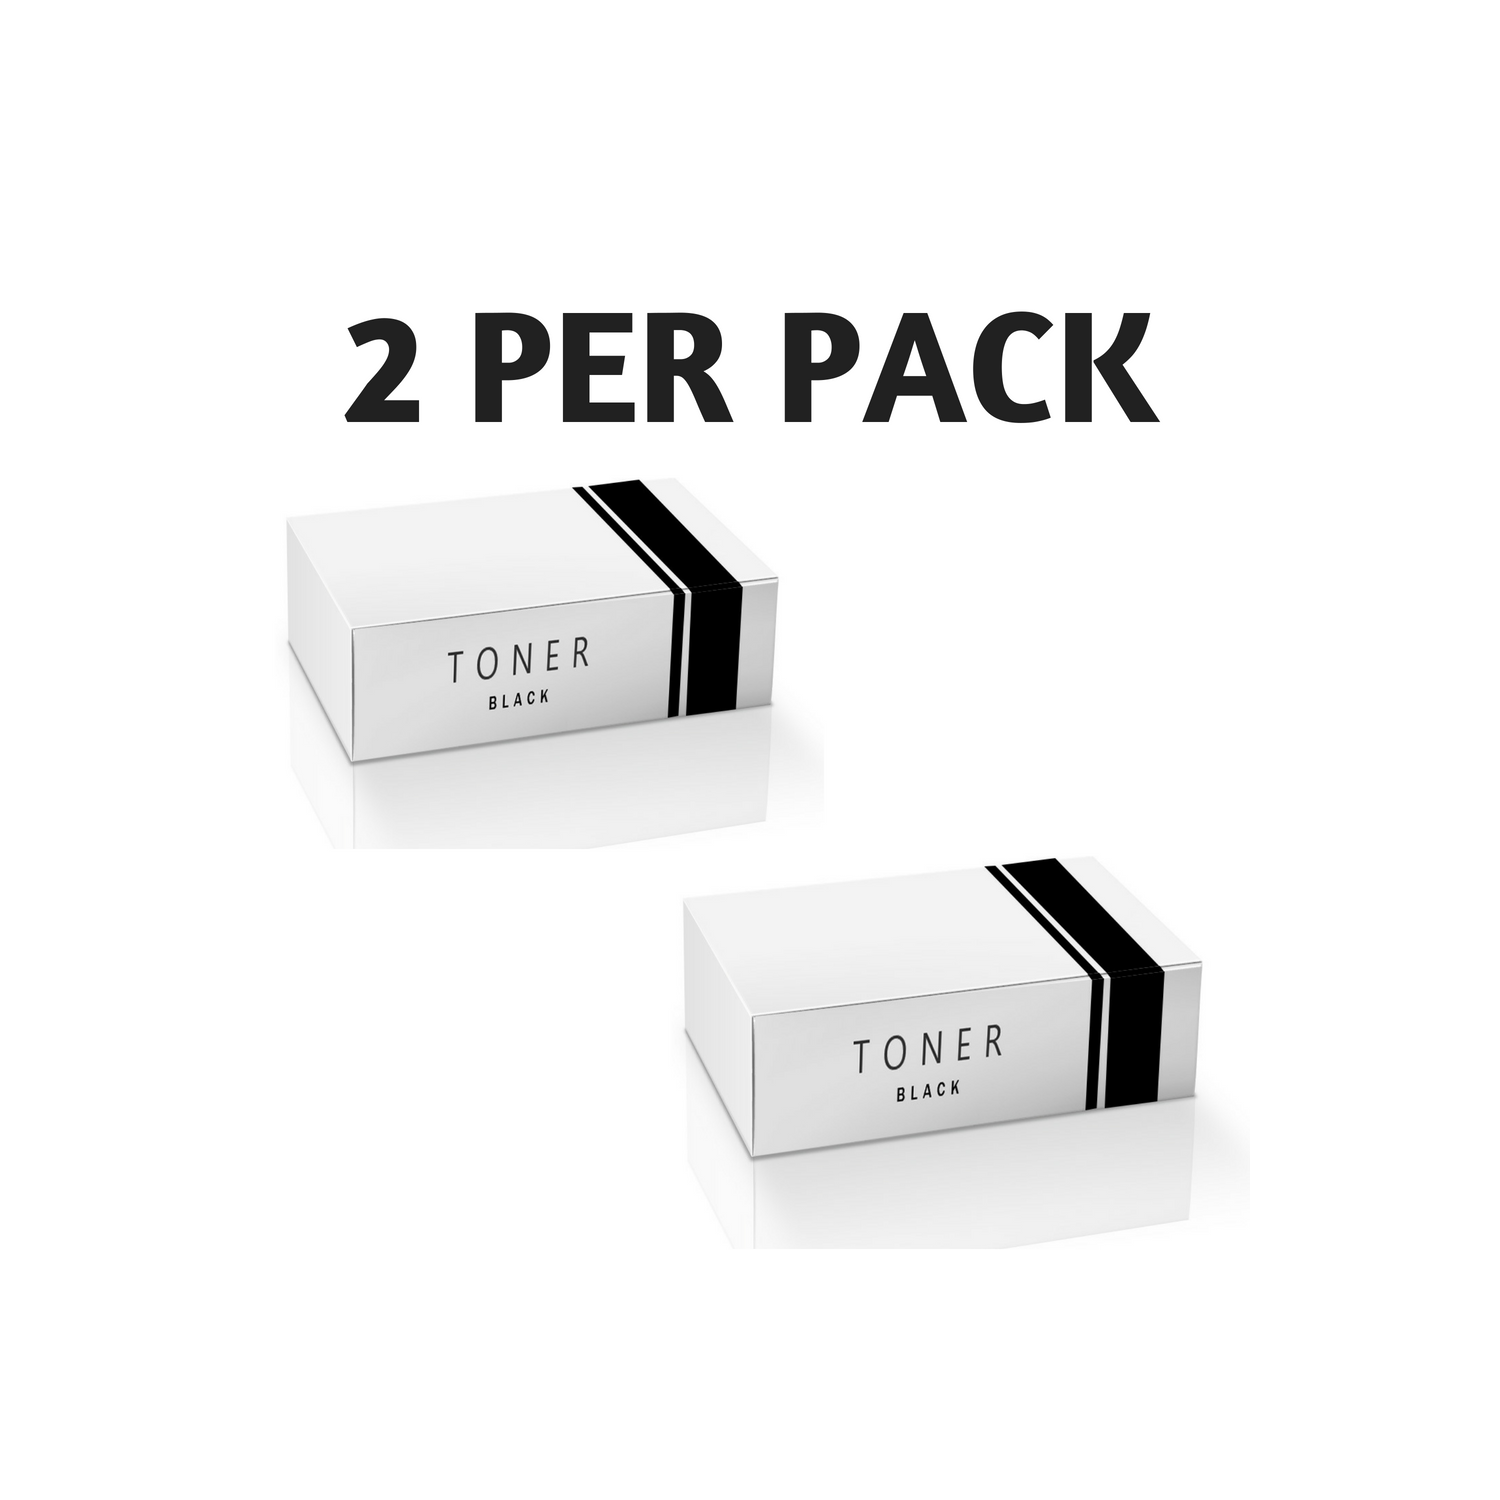 Generic Samsung MLT-D104S New Black Toner Cartridge - 2Pack -Free Shipping Over $50 (104S)